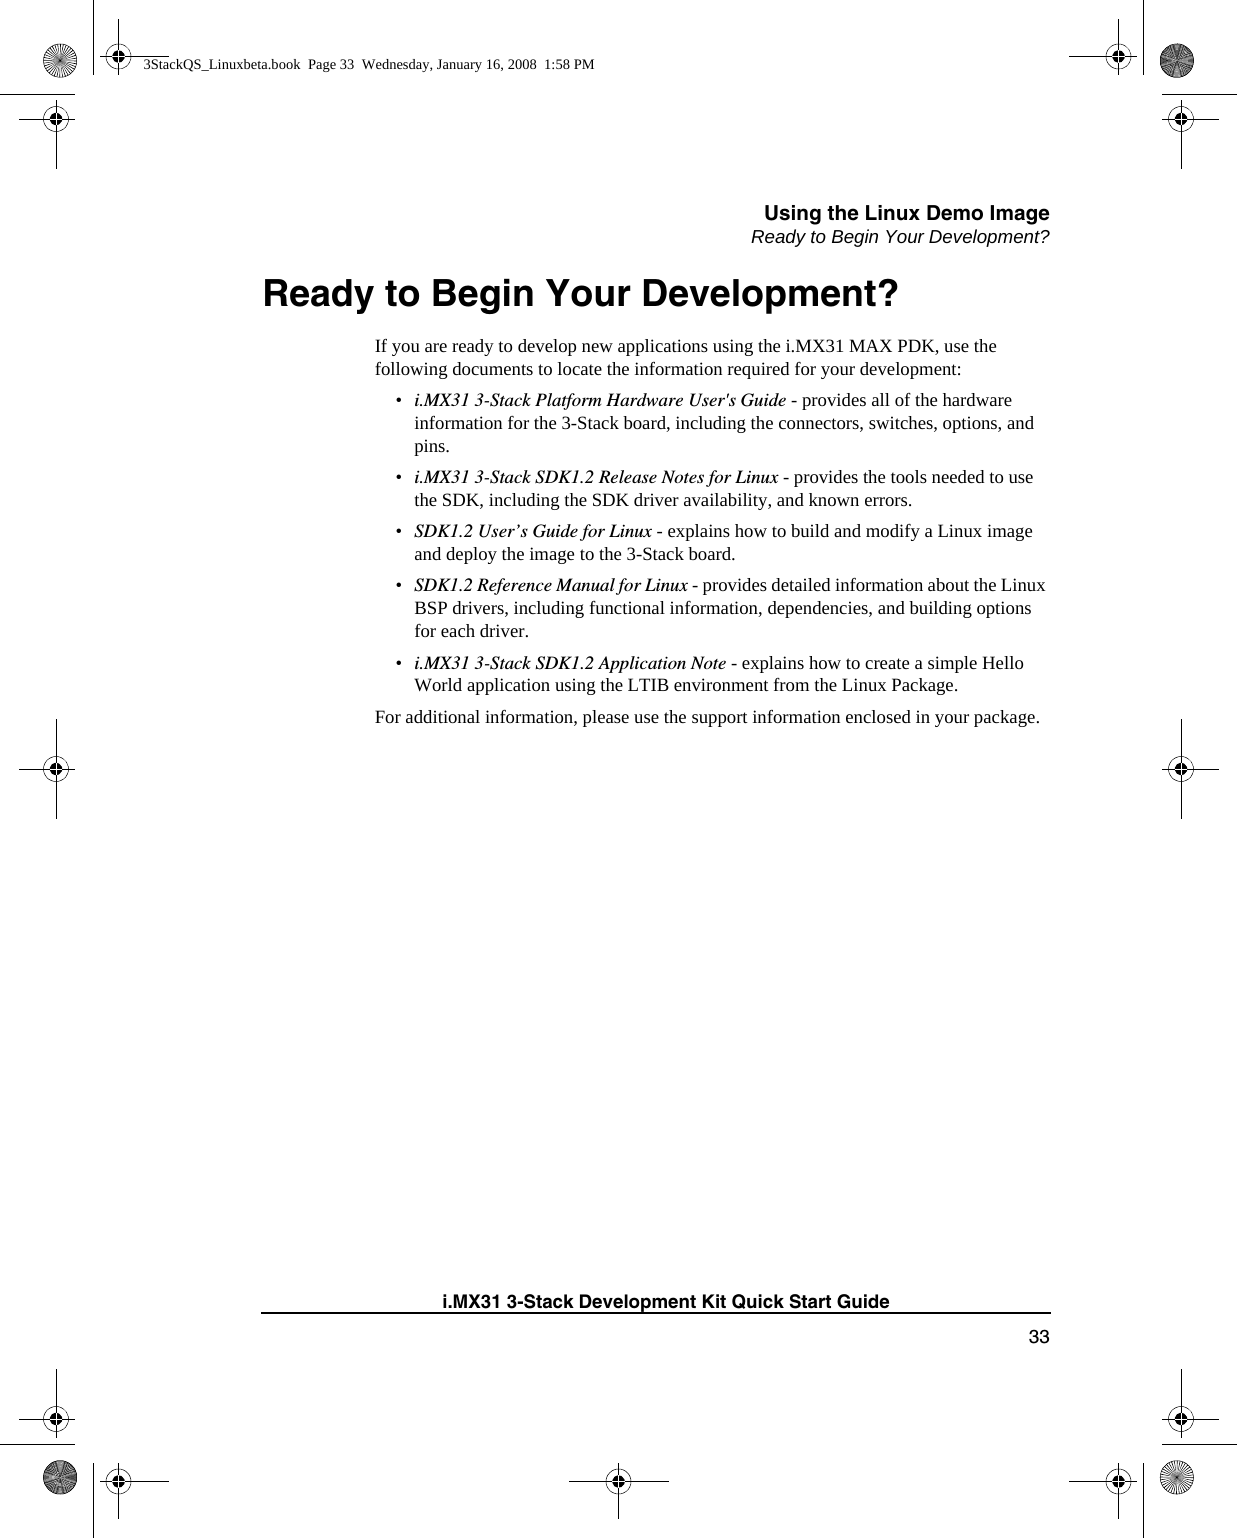 Using the Linux Demo ImageReady to Begin Your Development?33i.MX31 3-Stack Development Kit Quick Start GuideReady to Begin Your Development?If you are ready to develop new applications using the i.MX31 MAX PDK, use the following documents to locate the information required for your development:•i.MX31 3-Stack Platform Hardware User&apos;s Guide - provides all of the hardware information for the 3-Stack board, including the connectors, switches, options, and pins.•i.MX31 3-Stack SDK1.2 Release Notes for Linux - provides the tools needed to use the SDK, including the SDK driver availability, and known errors.•SDK1.2 User’s Guide for Linux - explains how to build and modify a Linux image and deploy the image to the 3-Stack board.•SDK1.2 Reference Manual for Linux - provides detailed information about the Linux BSP drivers, including functional information, dependencies, and building options for each driver.•i.MX31 3-Stack SDK1.2 Application Note - explains how to create a simple Hello World application using the LTIB environment from the Linux Package.For additional information, please use the support information enclosed in your package.3StackQS_Linuxbeta.book  Page 33  Wednesday, January 16, 2008  1:58 PM